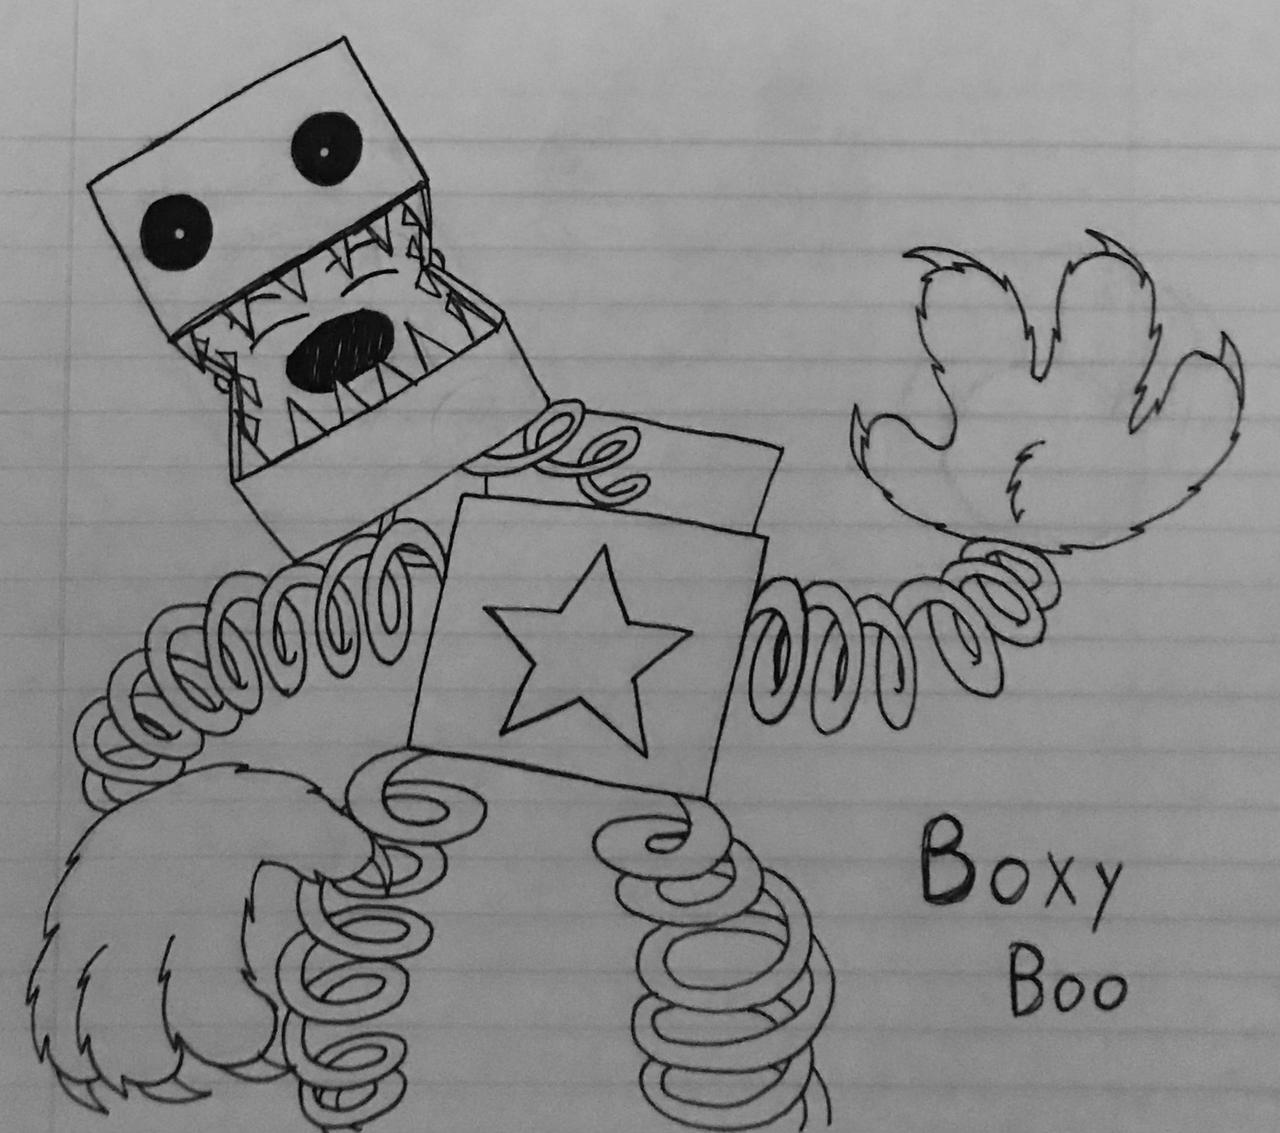 boxy boo PROJECT PLAYTIME by earlrd on DeviantArt